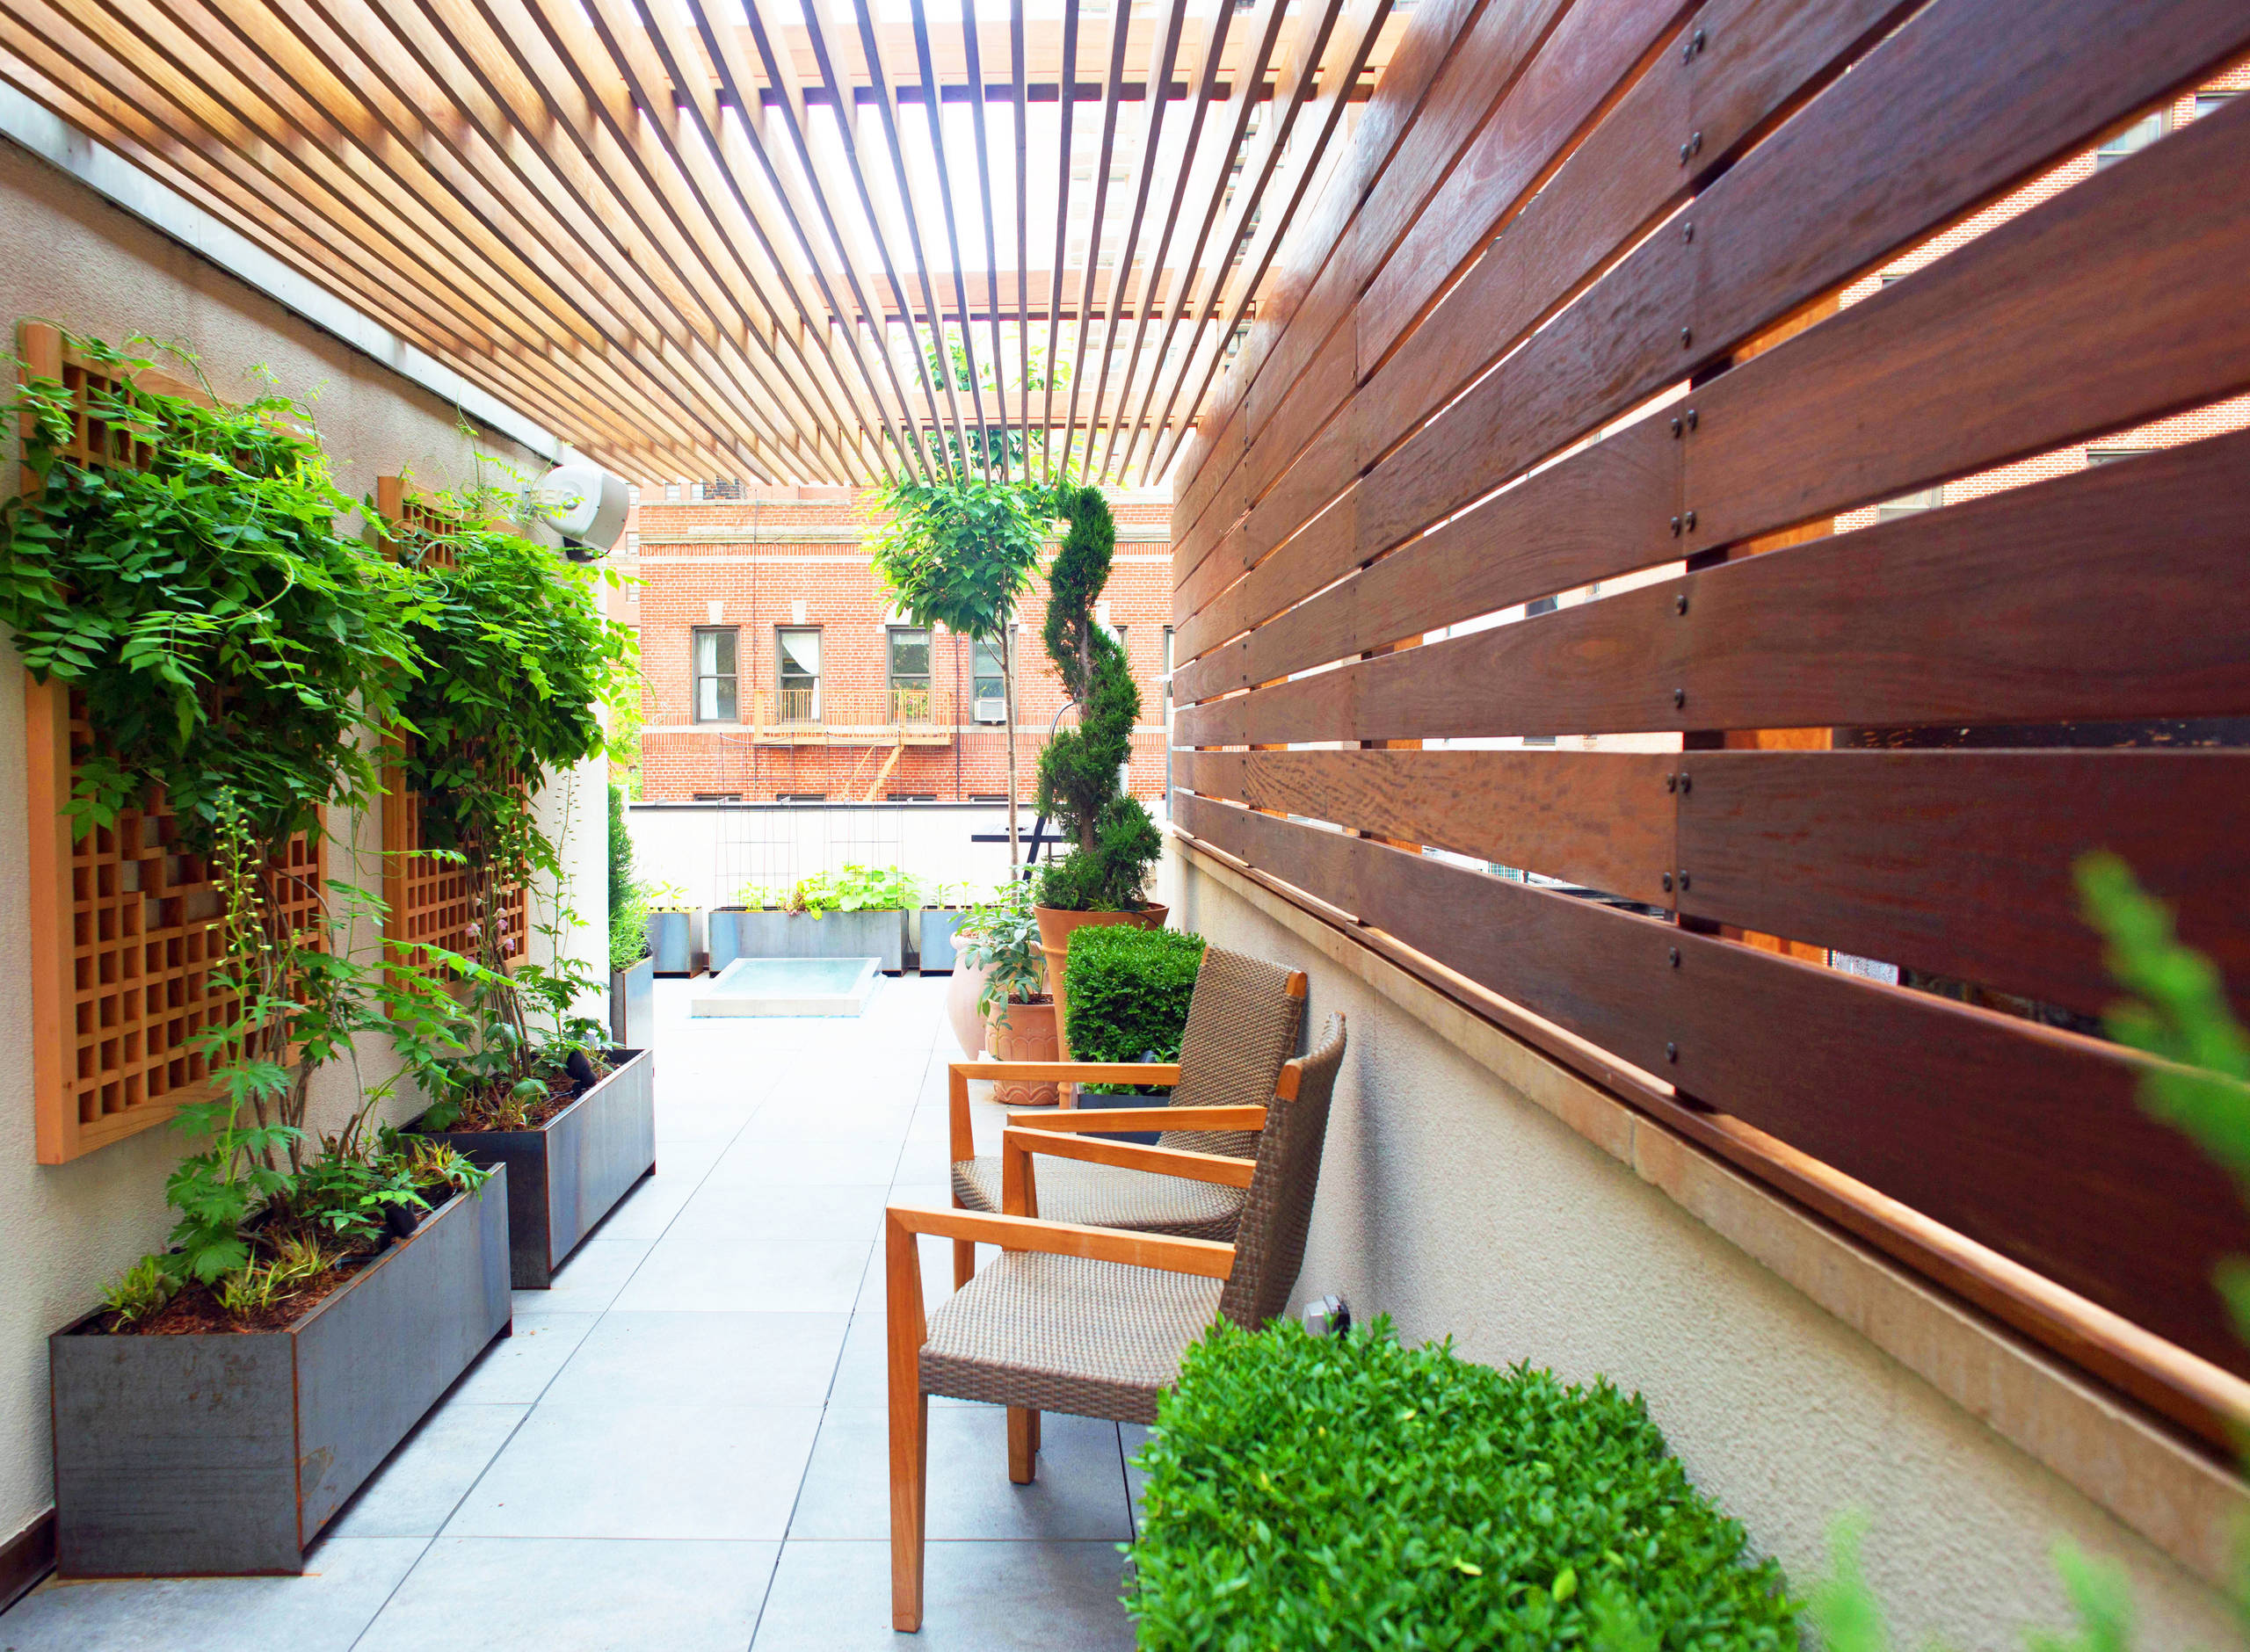 75 Rooftop Deck With A Pergola Ideas You'Ll Love - August, 2023 | Houzz